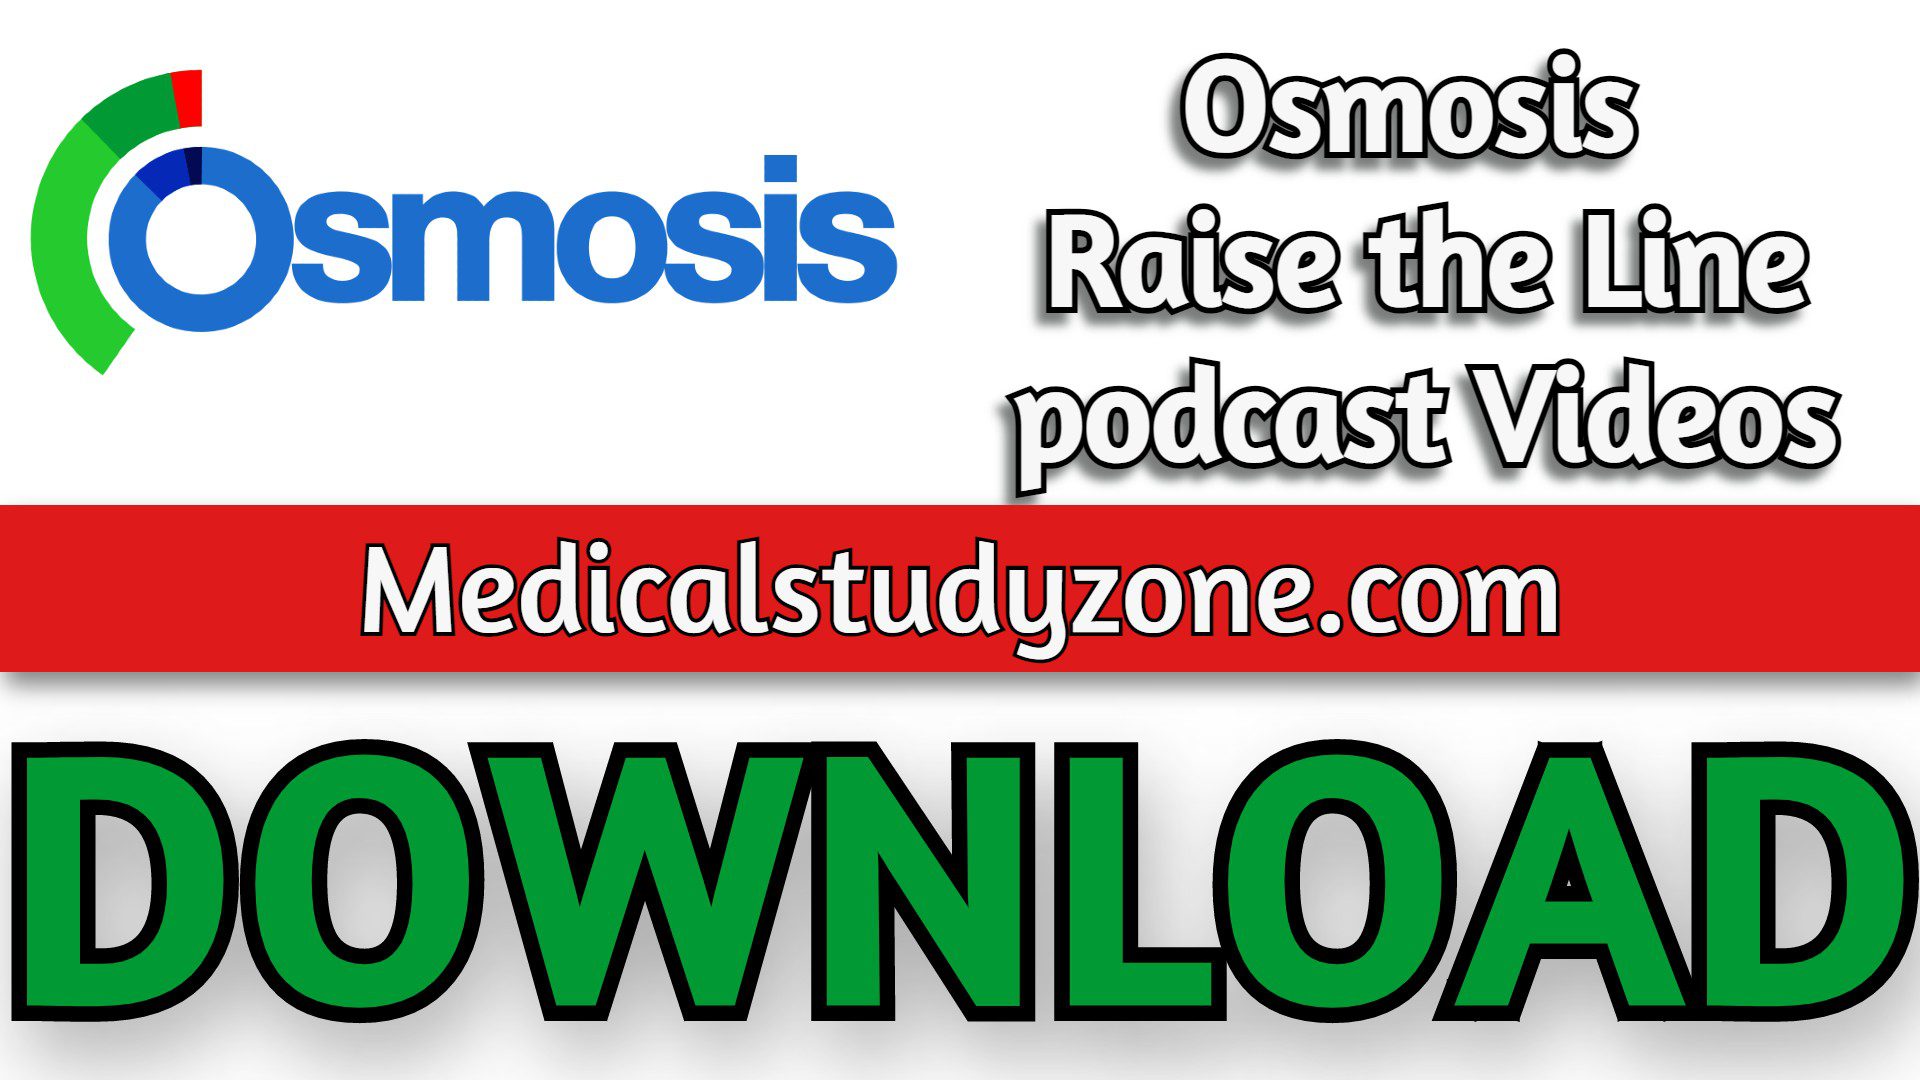 Osmosis Raise the Line podcast Videos 2022 Free Download